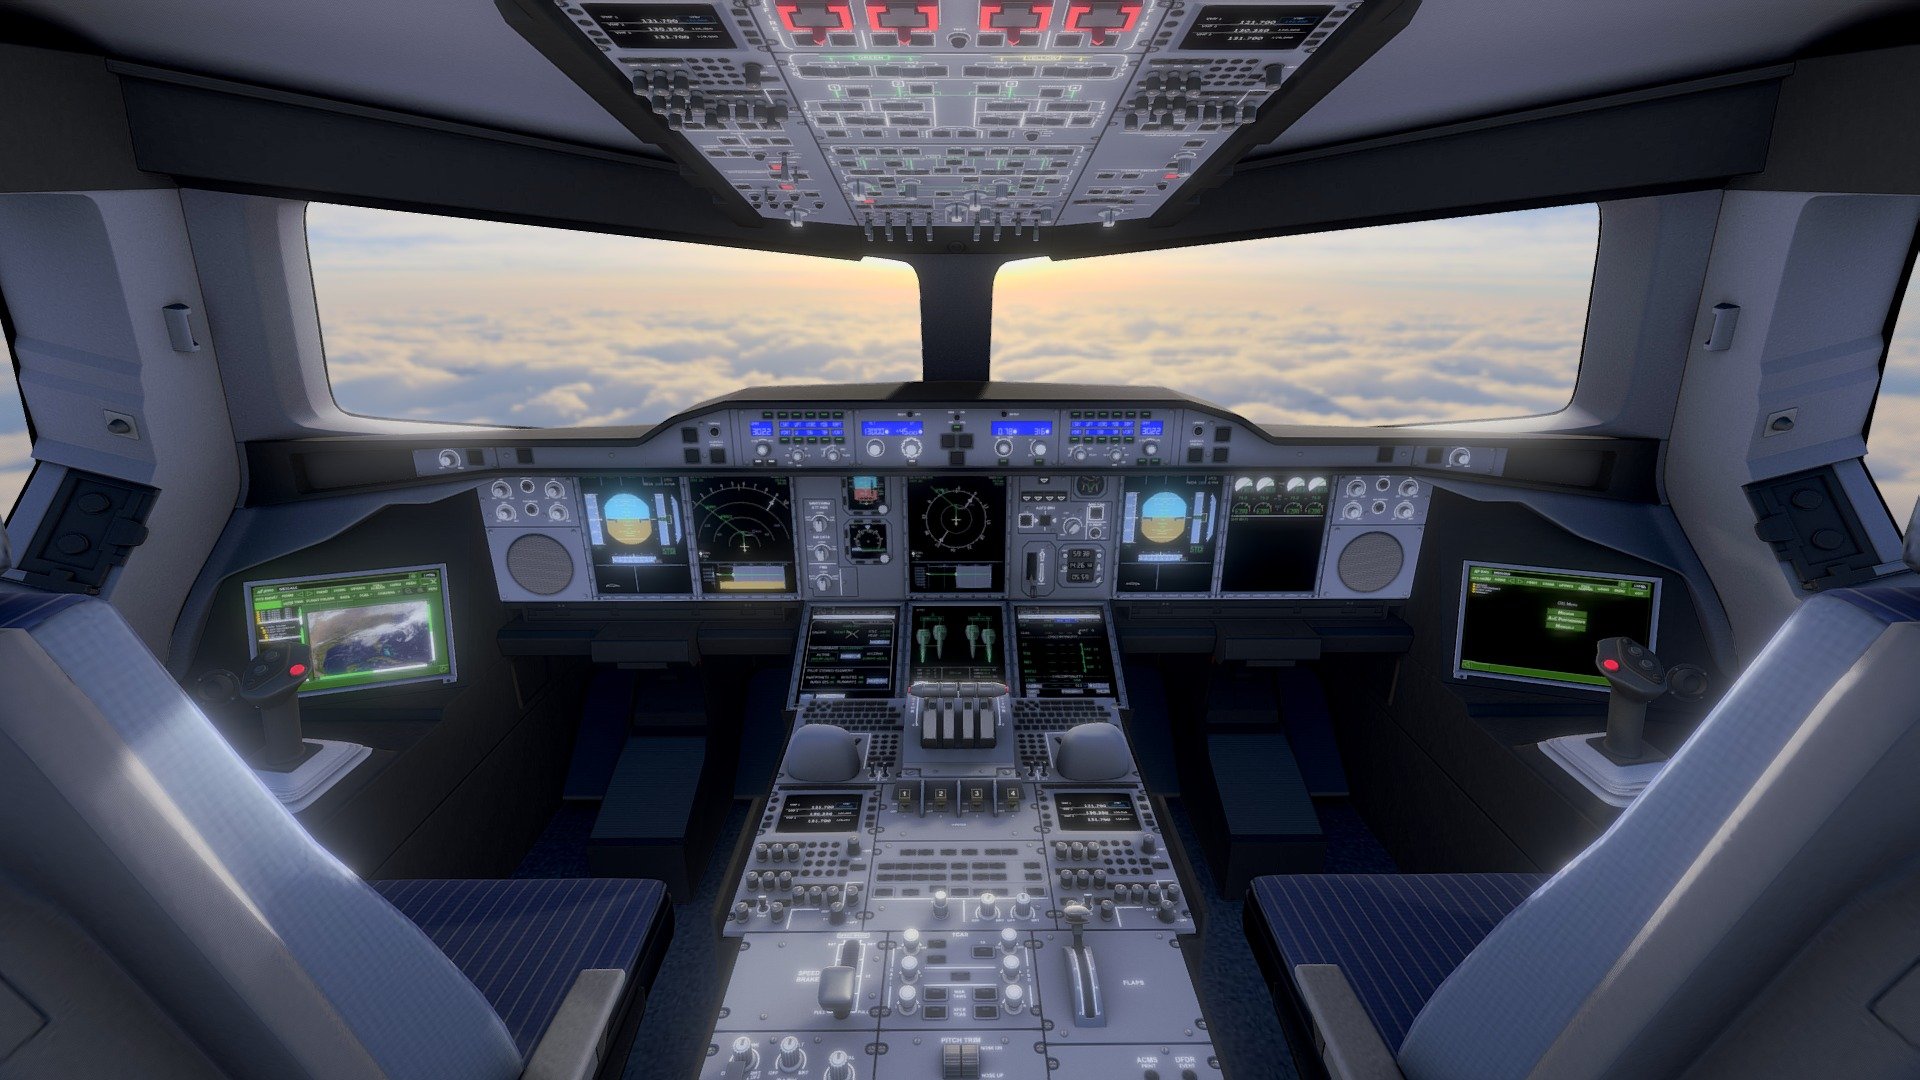 Airbus A380 Cockpit Flight Deck - Wide Angle

This asset is available for purchase here: https://skfb.ly/oJrCK - Airbus A380 Cockpit Flight Deck - Wide Angle - 3D model by RealtimeModels 3d model